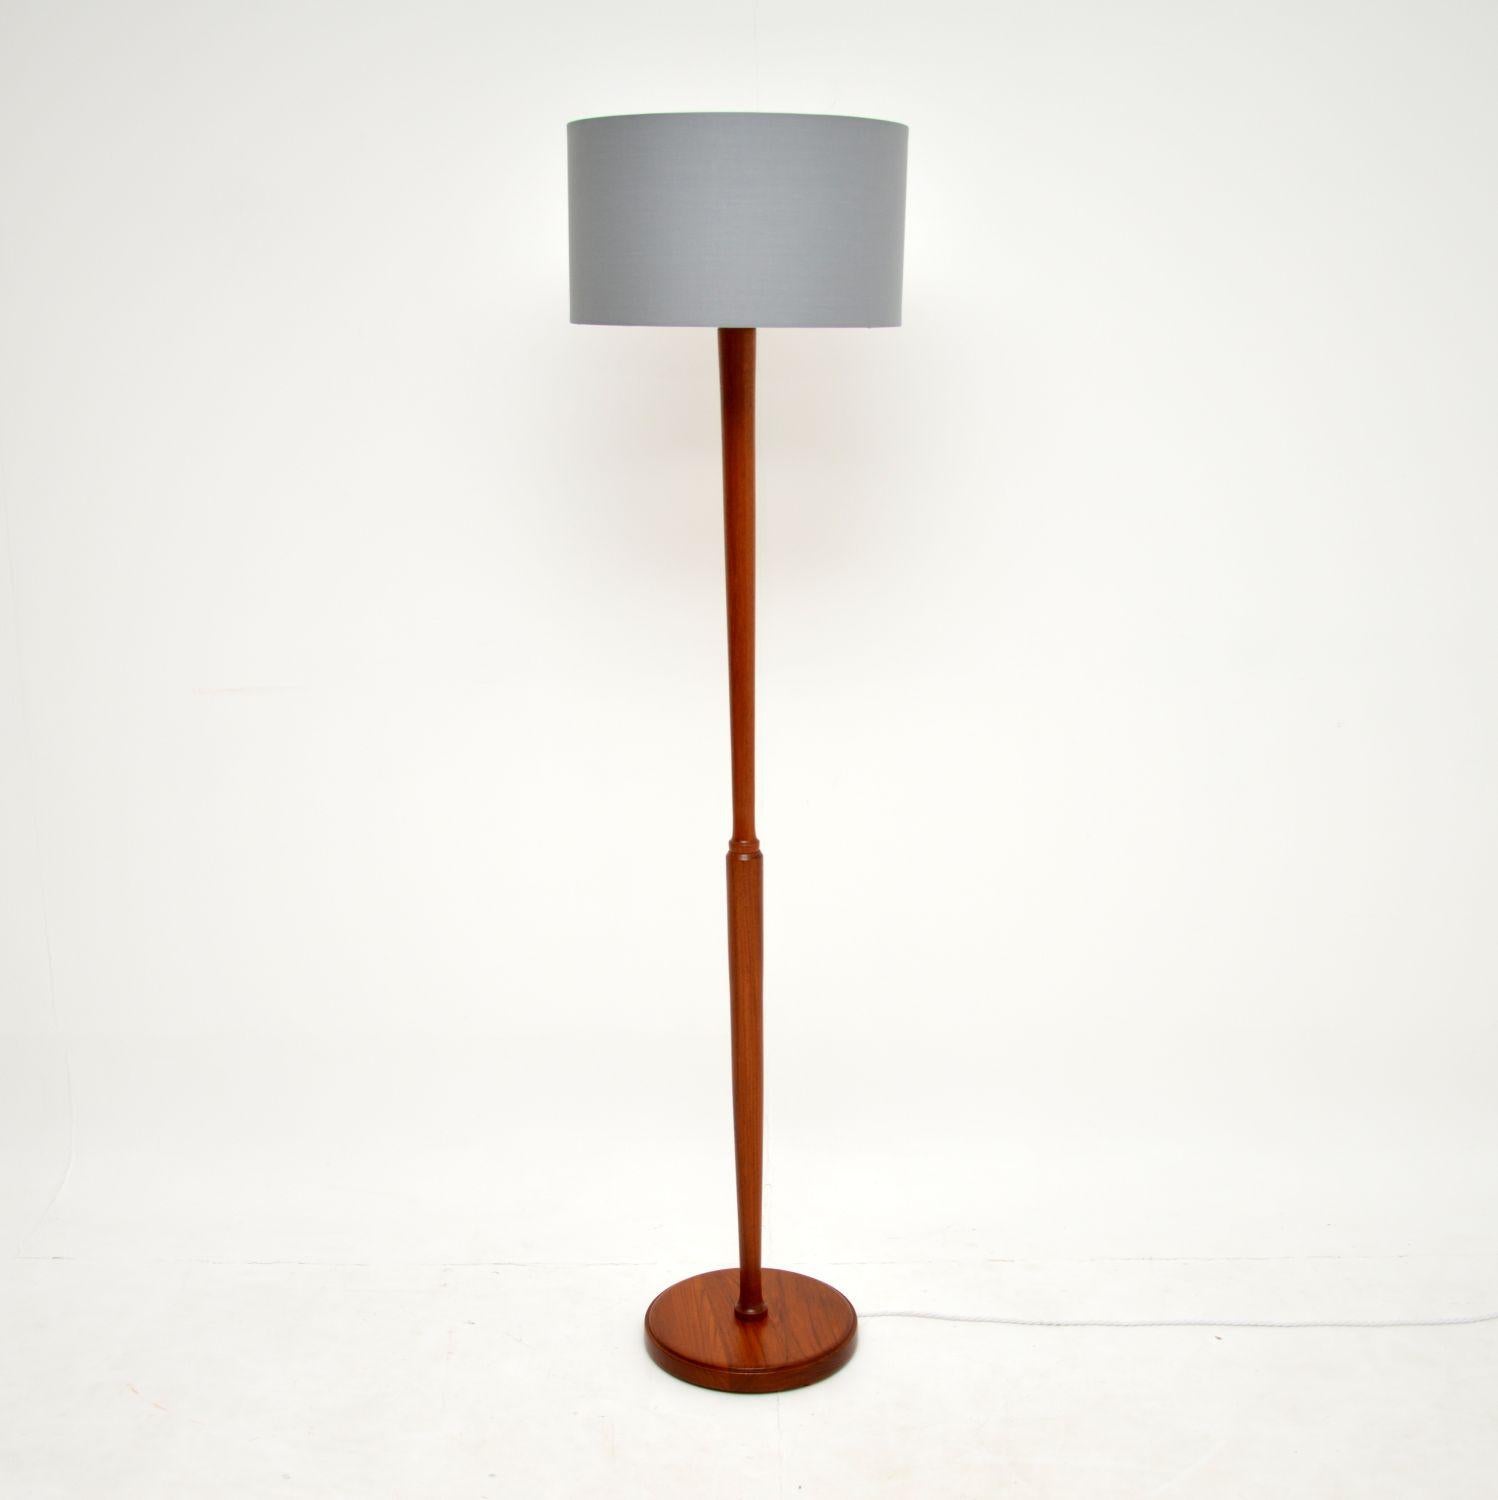 A beautifully made vintage floor lamp in solid teak. This was most likely made in Denmark, it dates from the 1960’s.

We have had this completely stripped and re-polished to a very high standard, it is in superb condition throughout. This has a